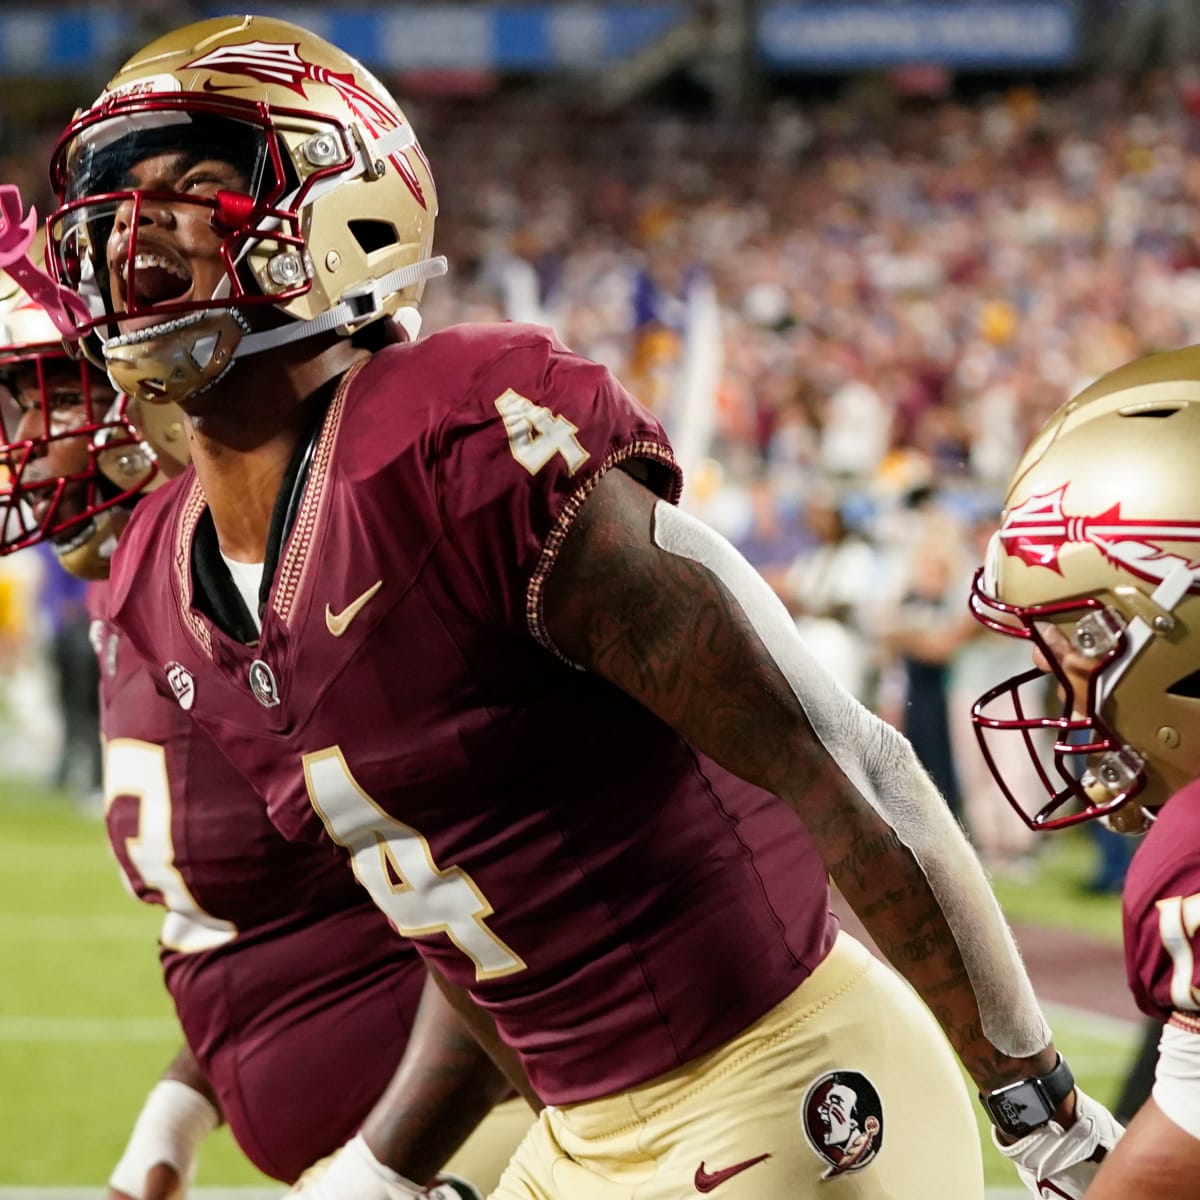 Everything happens for a reason': Florida State's Jordan Travis